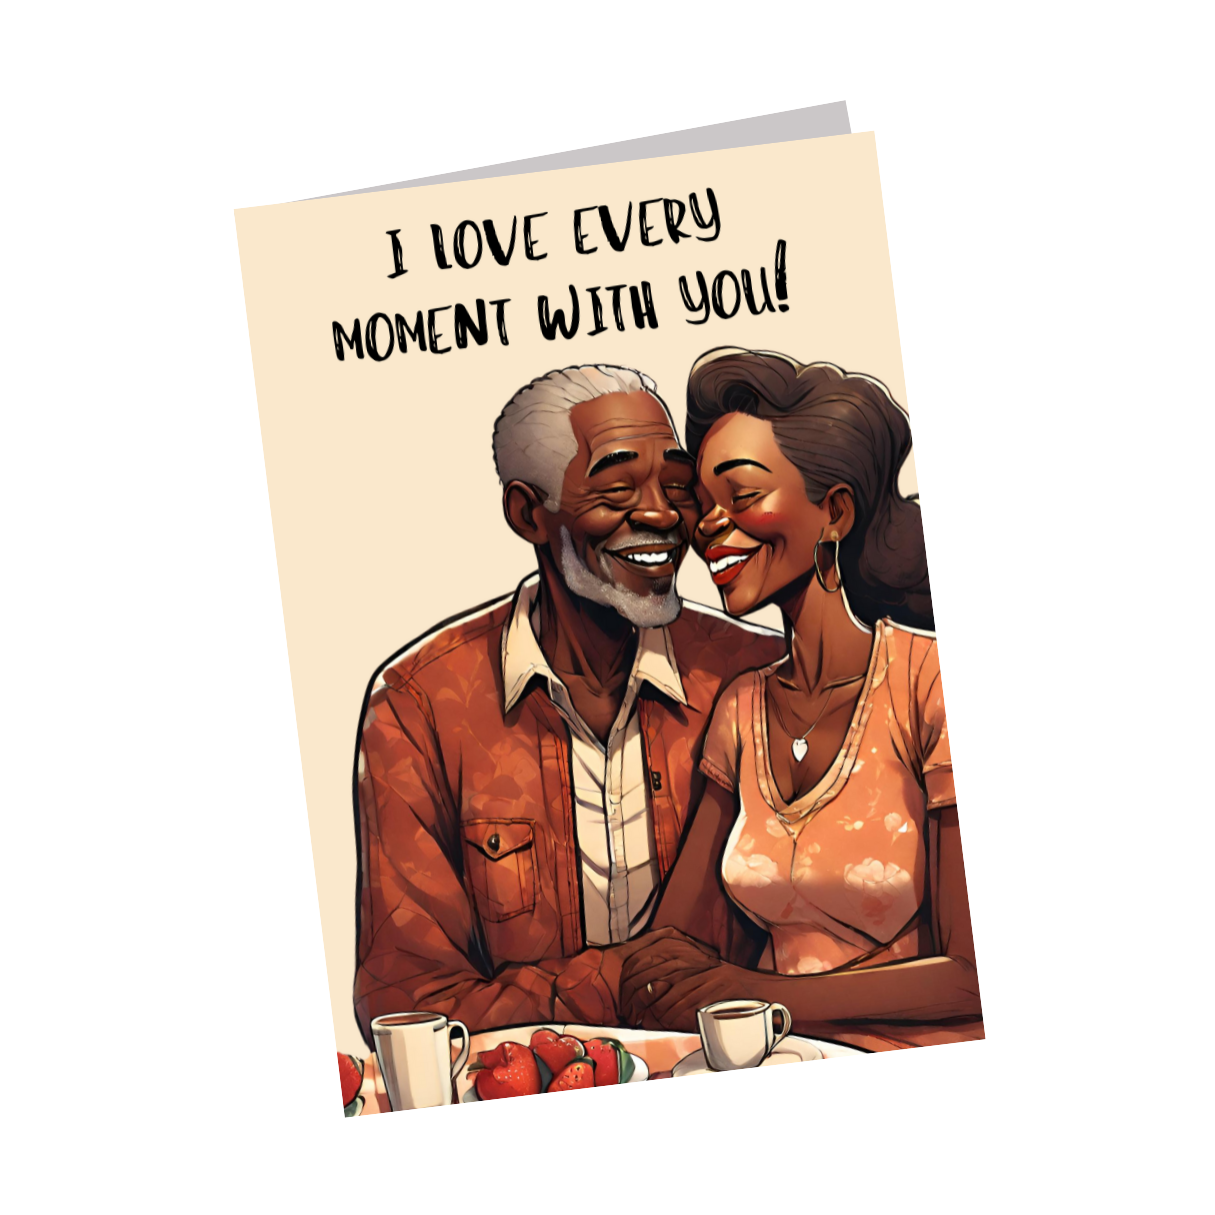 I Love Every Moment With You! - Older Couple Anniversary/Valentines Card